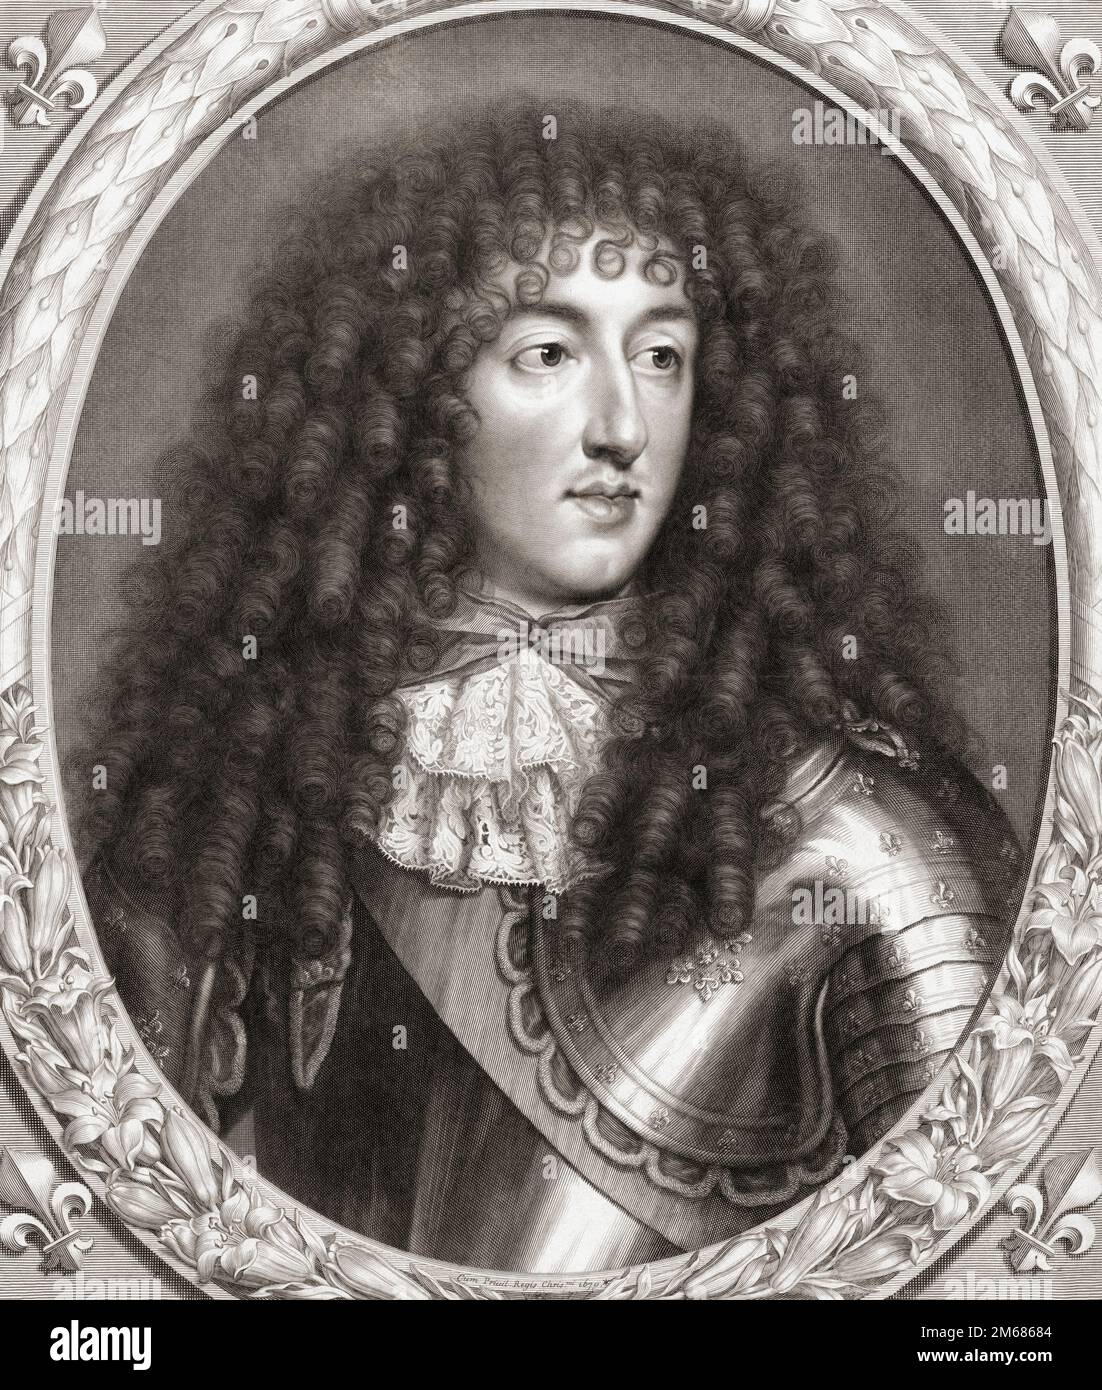 Monsieur Philippe I, Duke of Orléans, 1640 – 1701.  Youngest son of French King Louis XIII.  From a print by Pieter van Schuppen after the painting by Charles Le Brun. Stock Photo